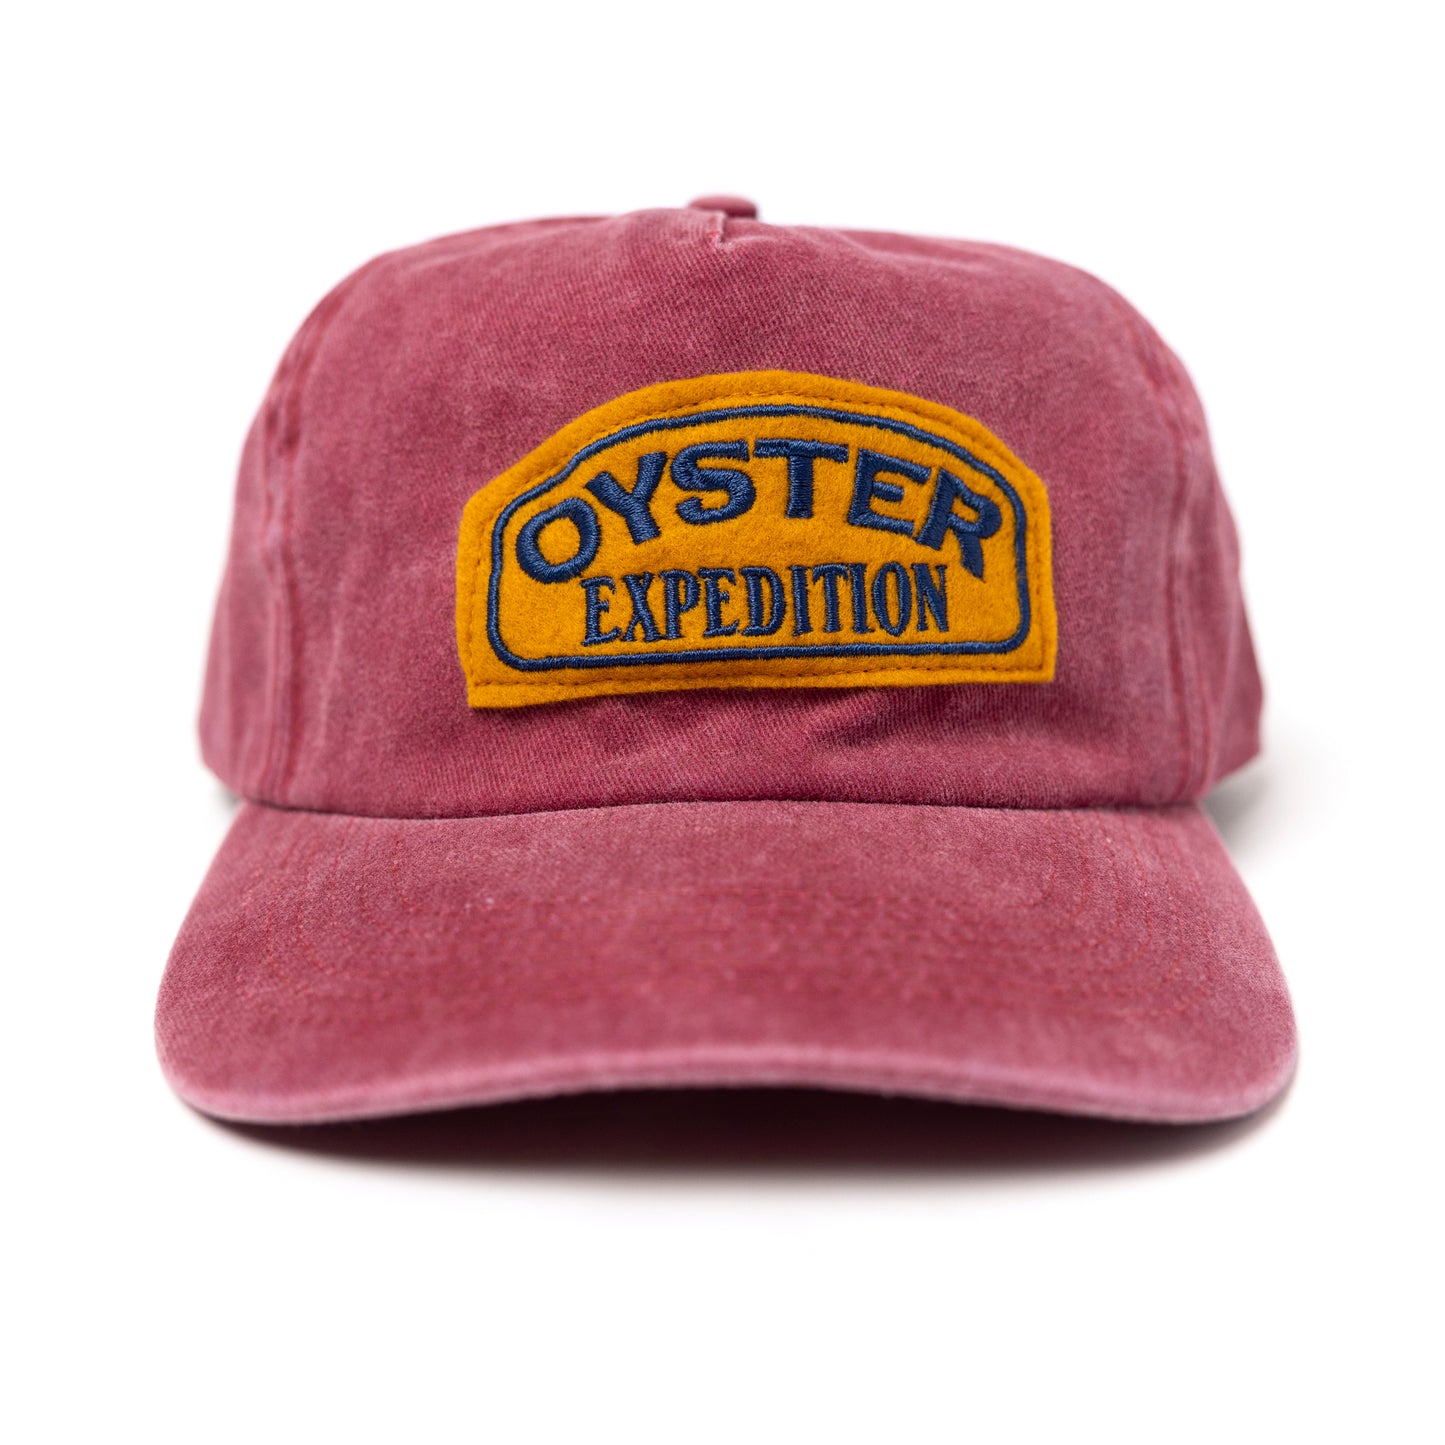 Oyster Expedition Snapback (Washed Wine)